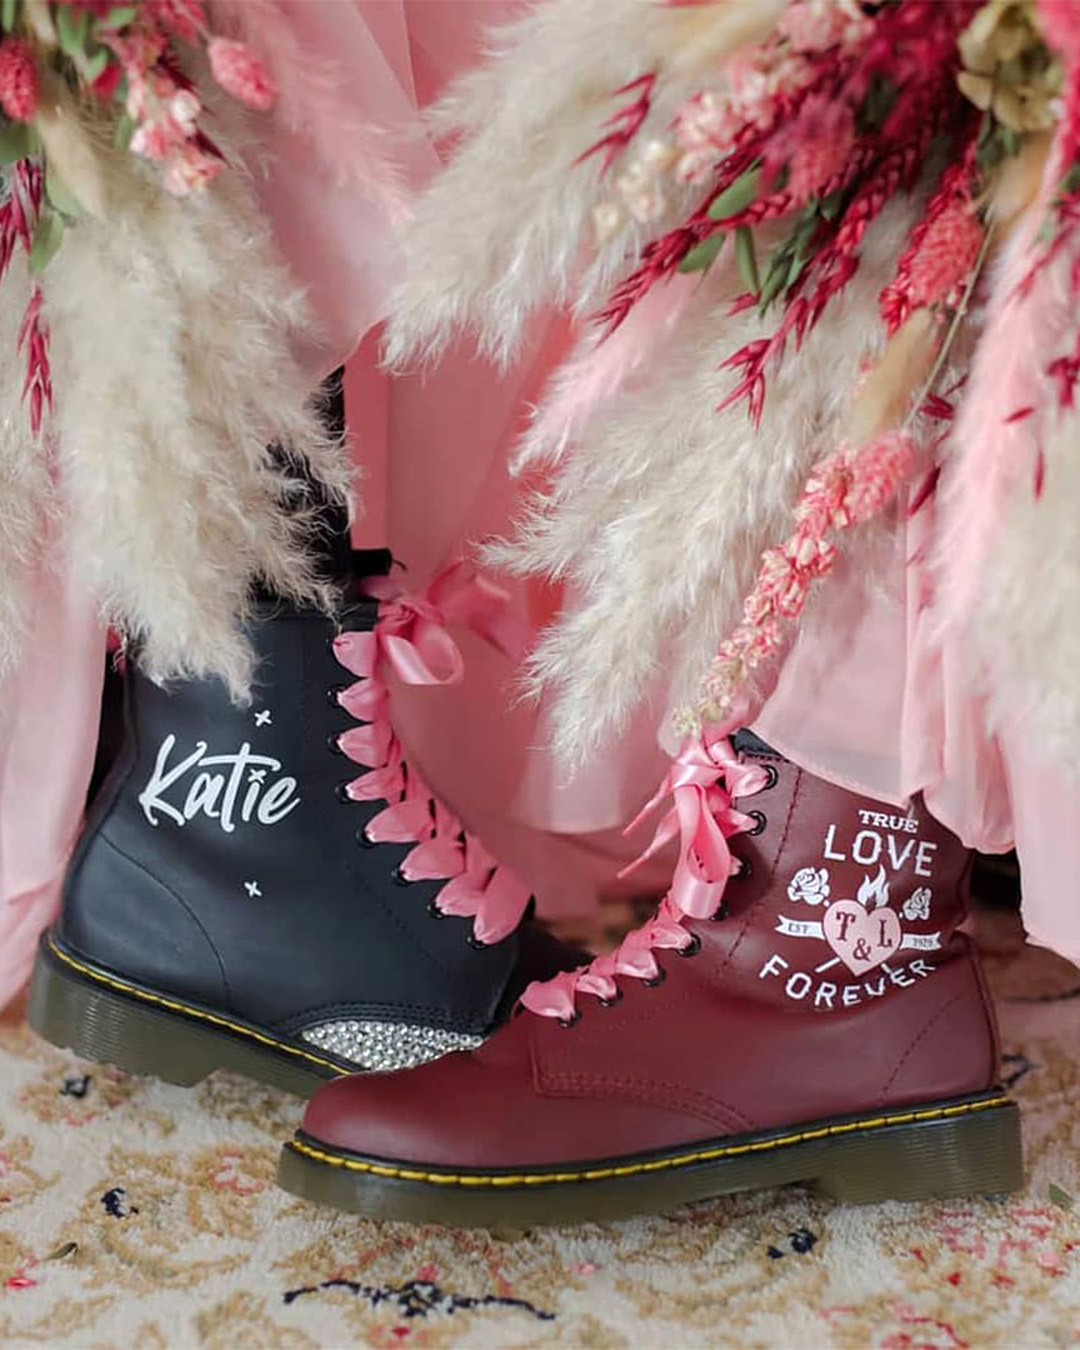 burgundy wedding shoes comfortable leather boots wedding_converse